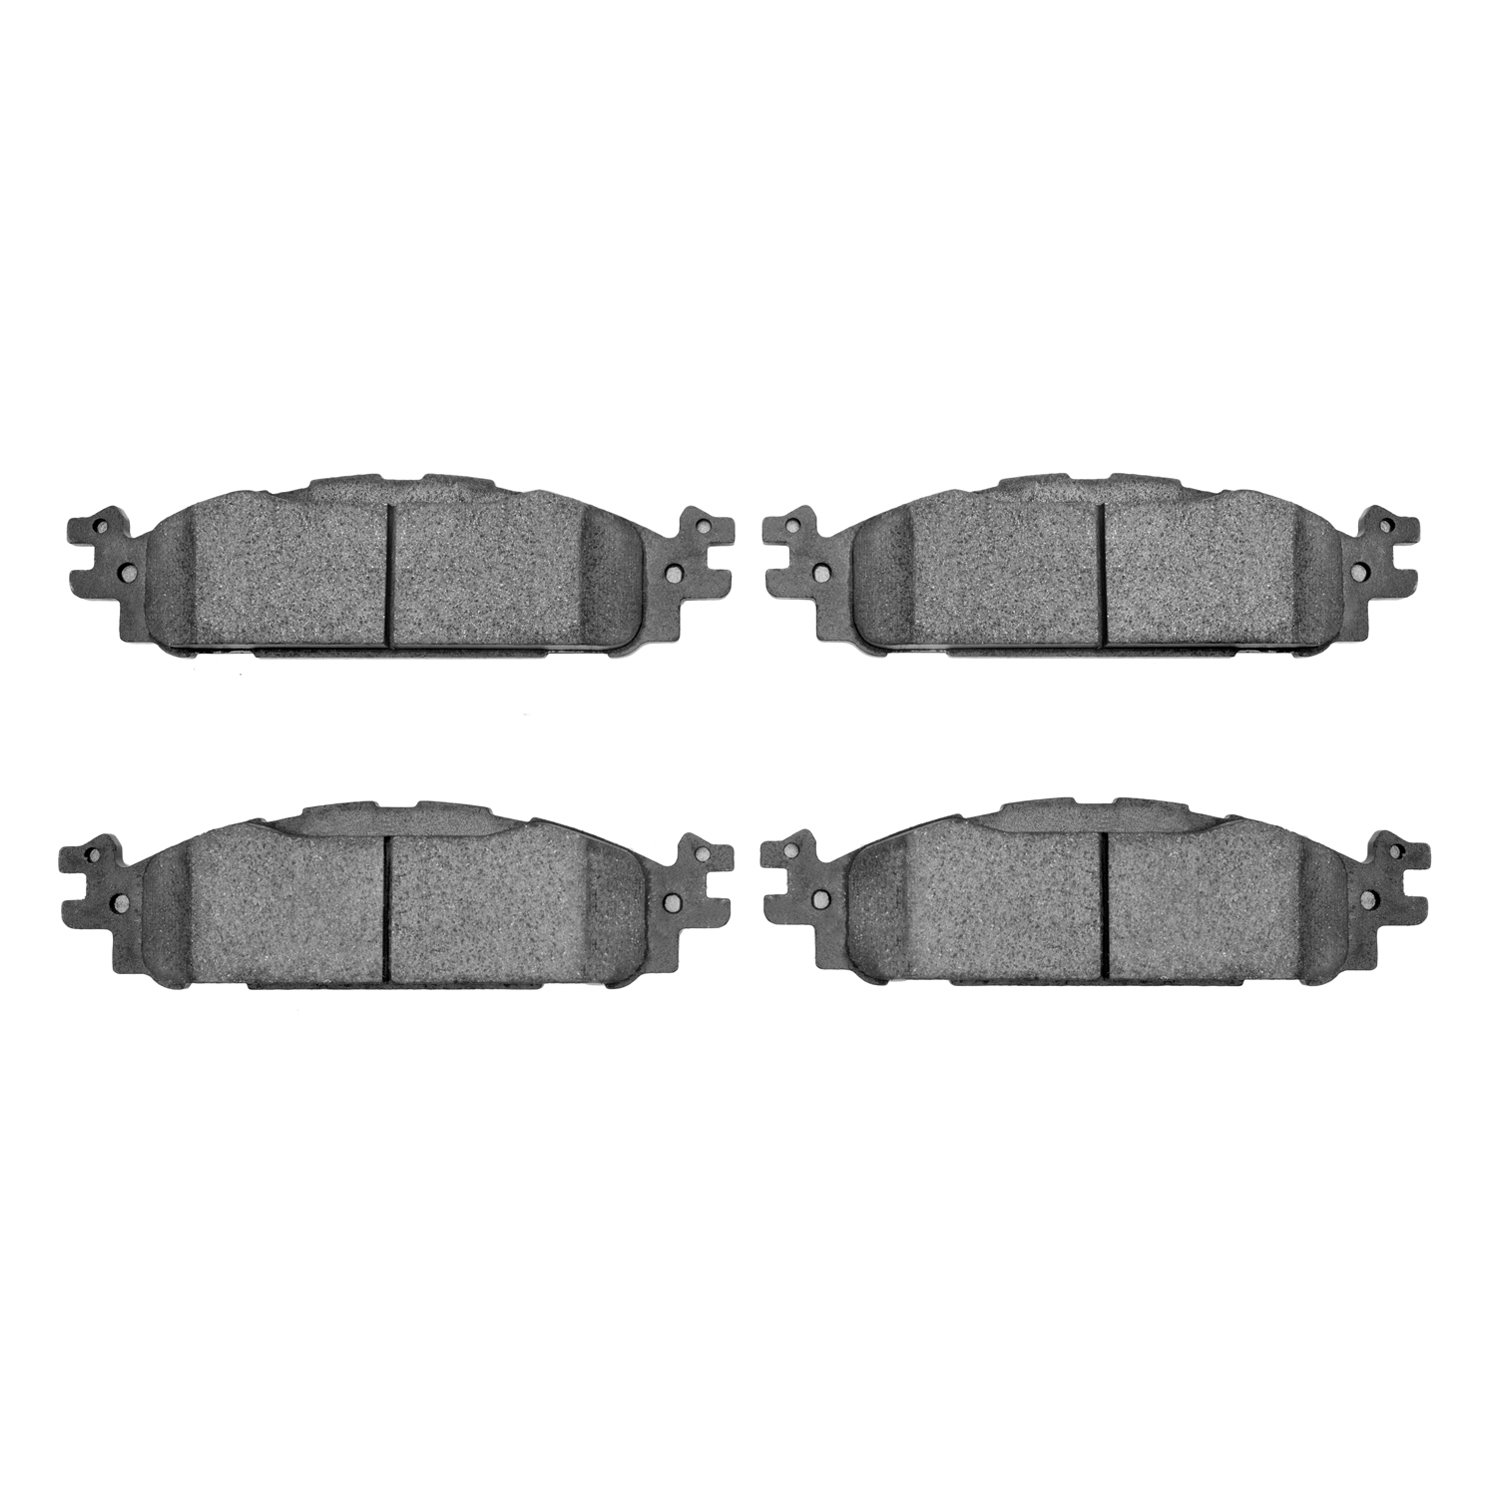 1000-1508-00 Track/Street Low-Metallic Brake Pads Kit, 2009-2019 Ford/Lincoln/Mercury/Mazda, Position: Front